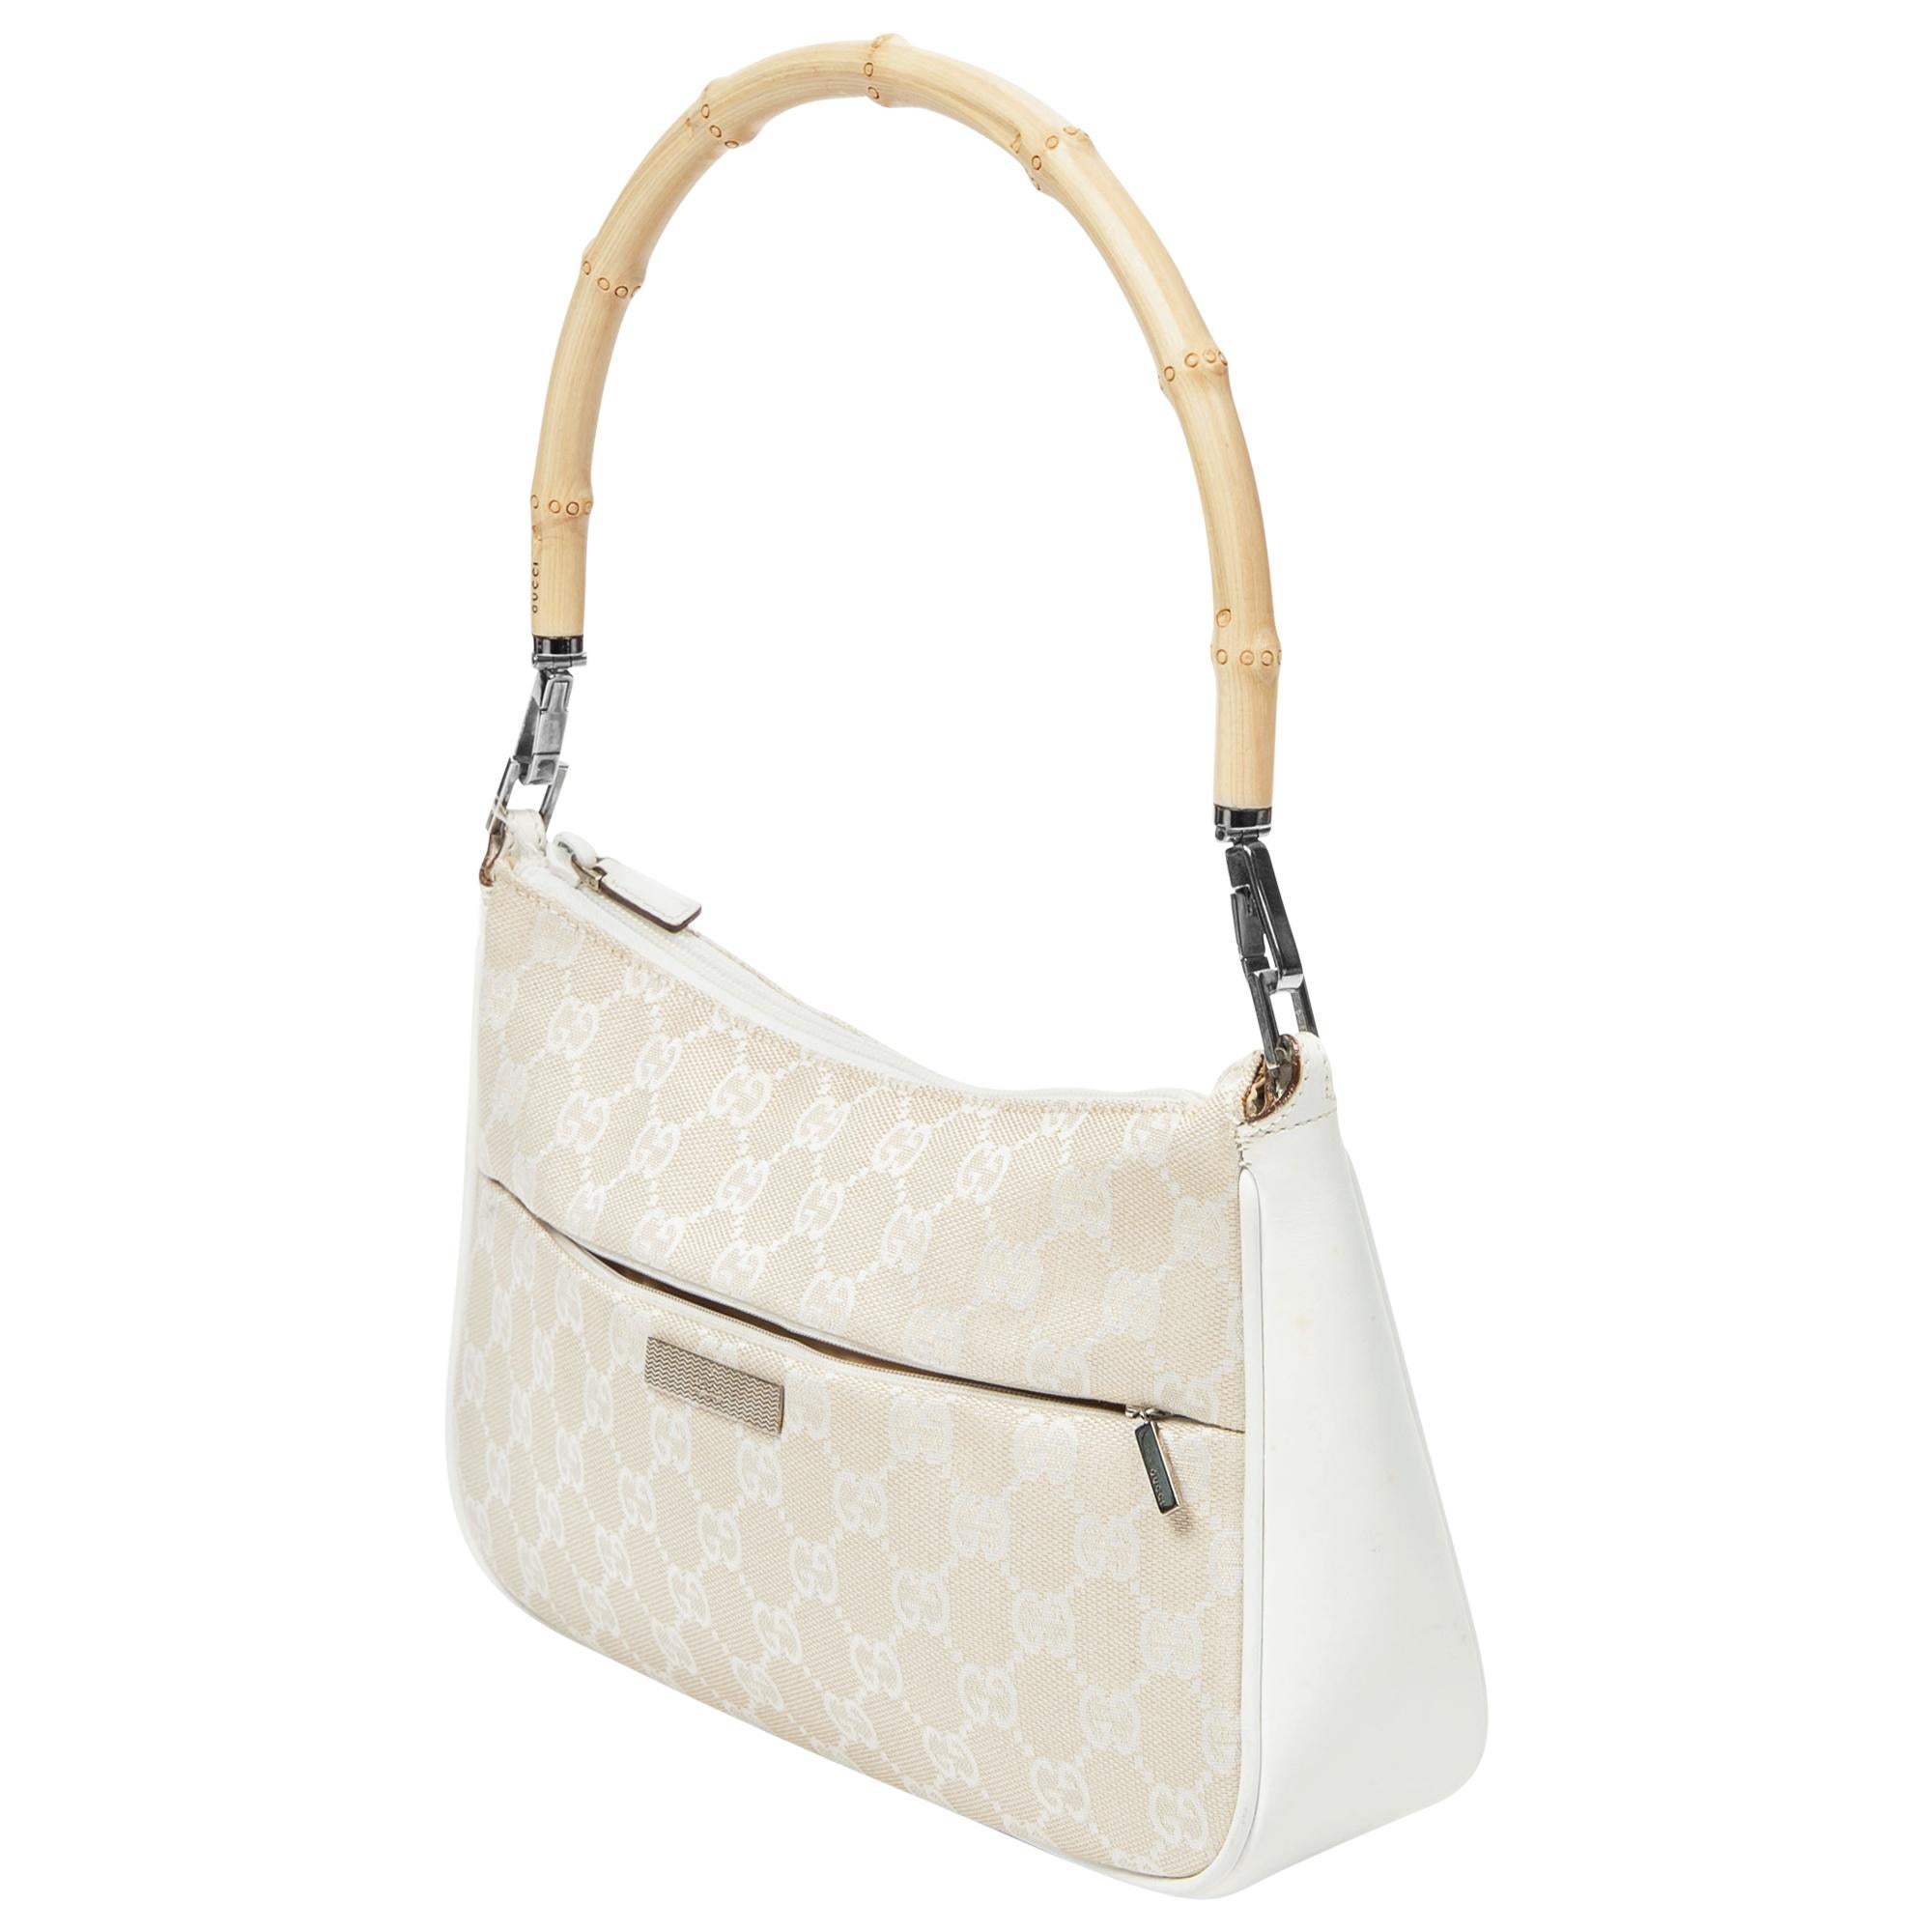 Elevate your everyday style with the Gucci White/Beige GG Bamboo Shoulder Bag. Crafted from durable canvas in a chic beige hue, it exudes understated sophistication. Adorned with silver-tone hardware and featuring a practical zipper closure, its